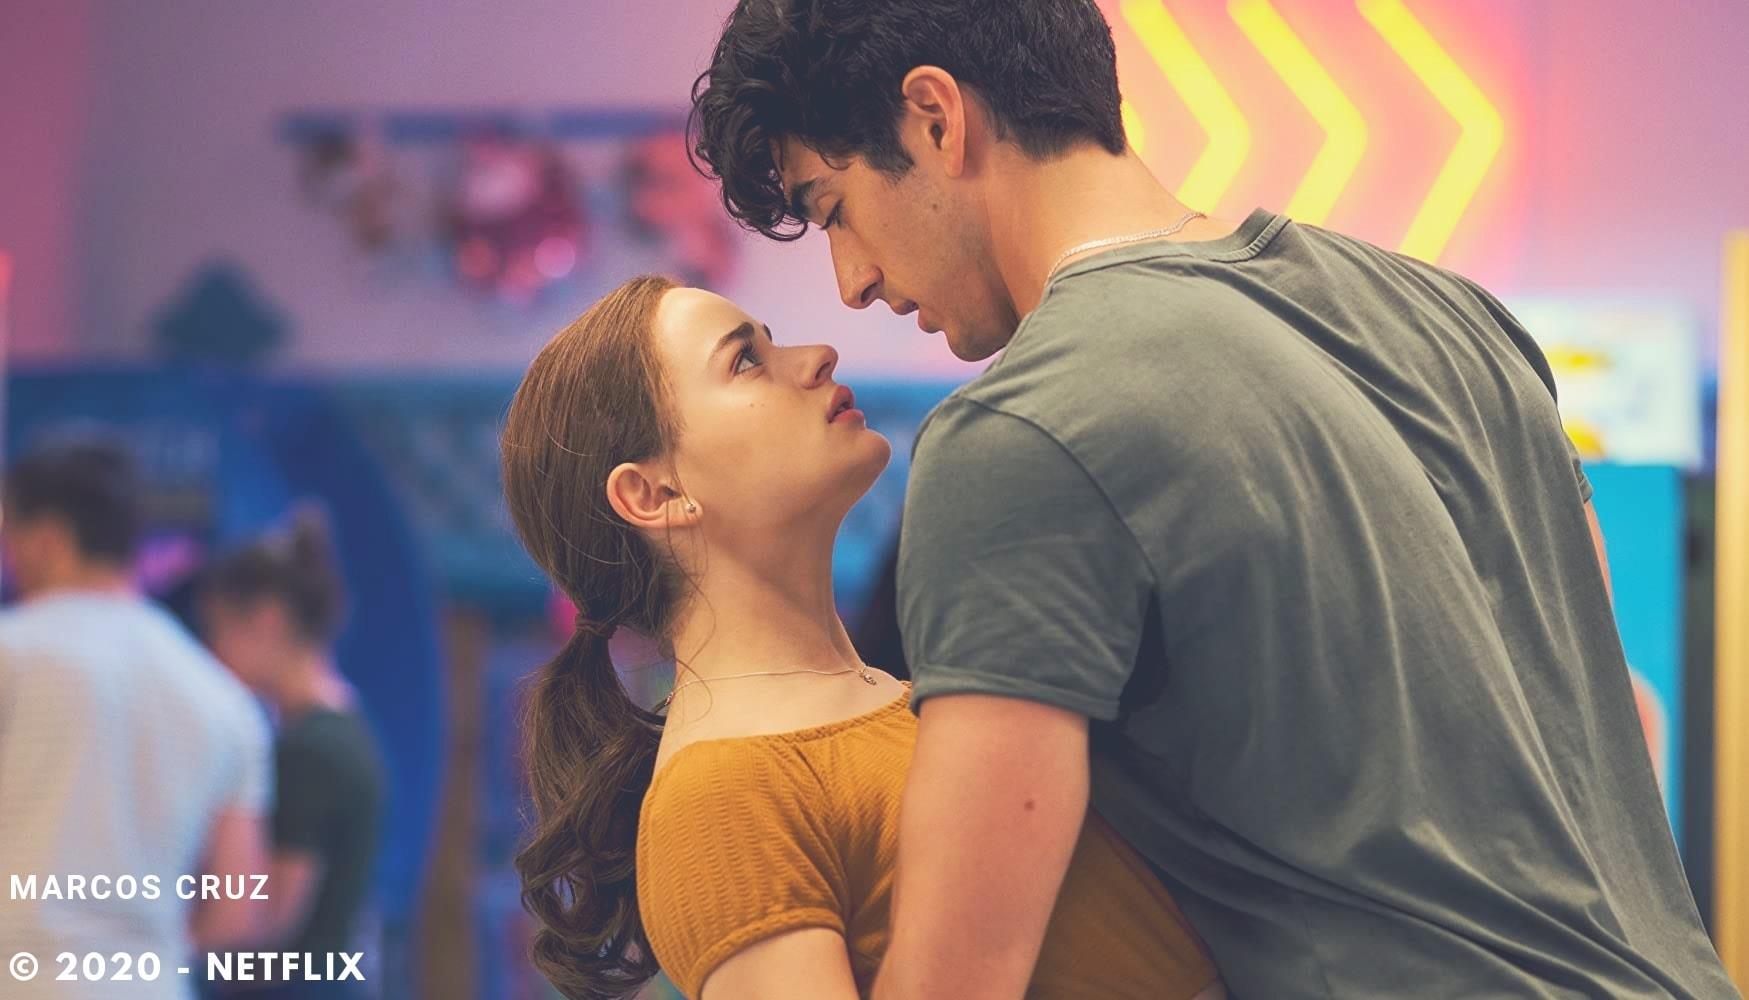 How The Kissing Booth 3 will follow previous movie, know more in details!